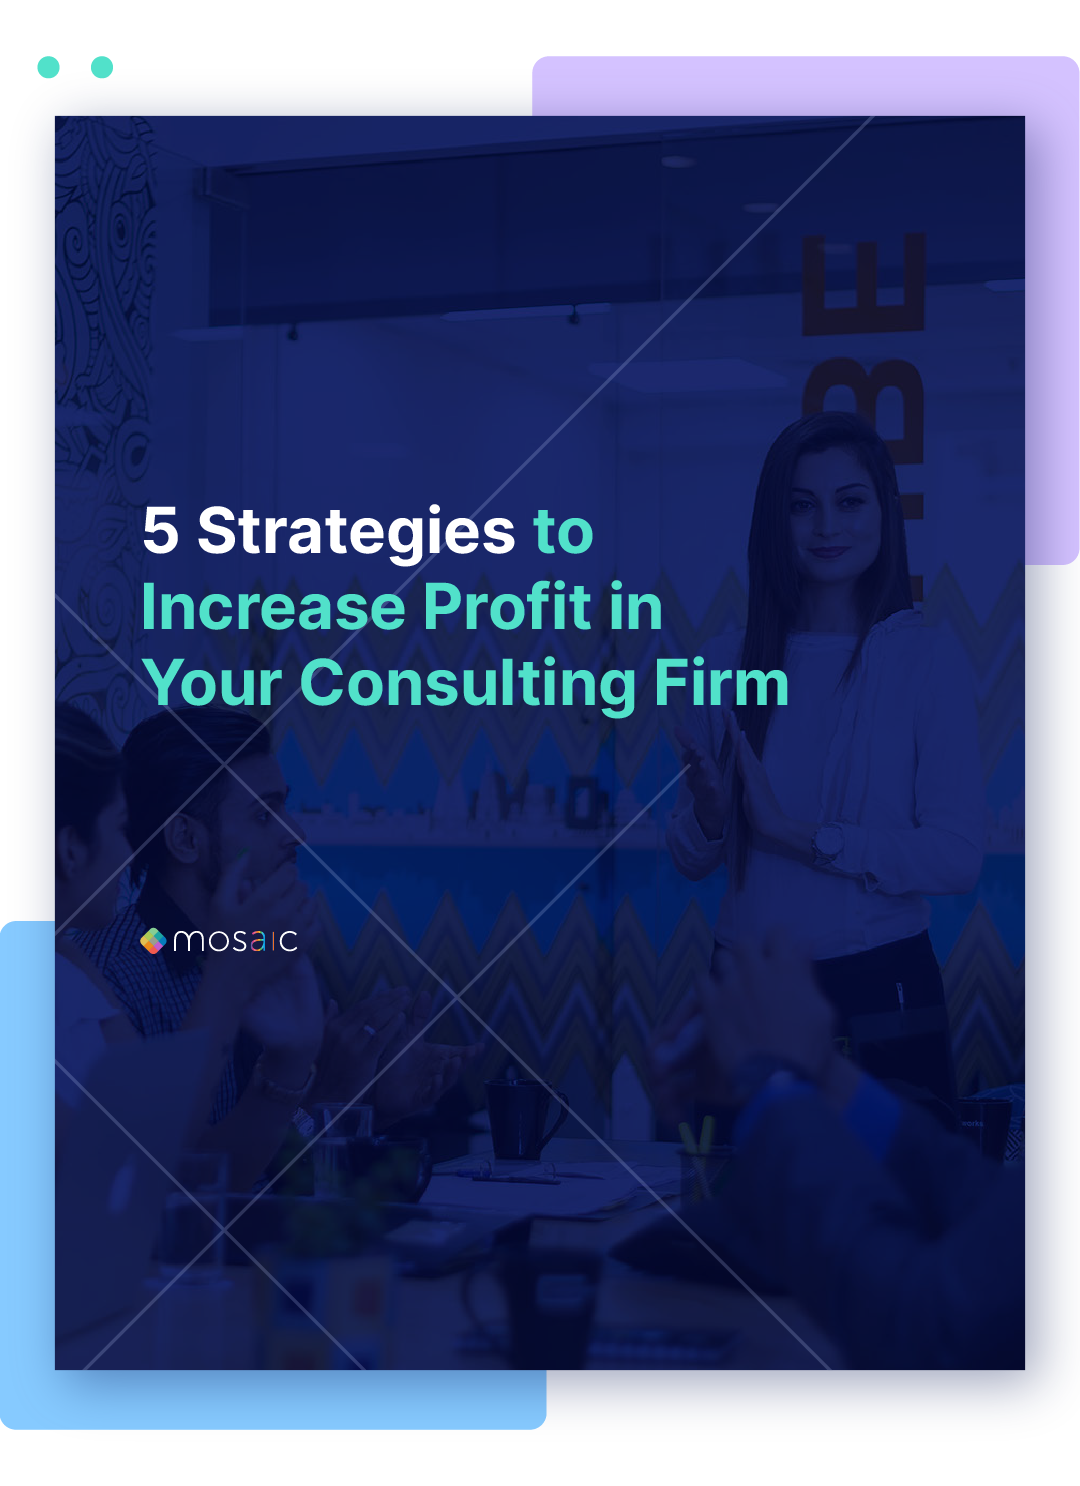 5 Strategies to Increase Profit in Your Consulting Firm